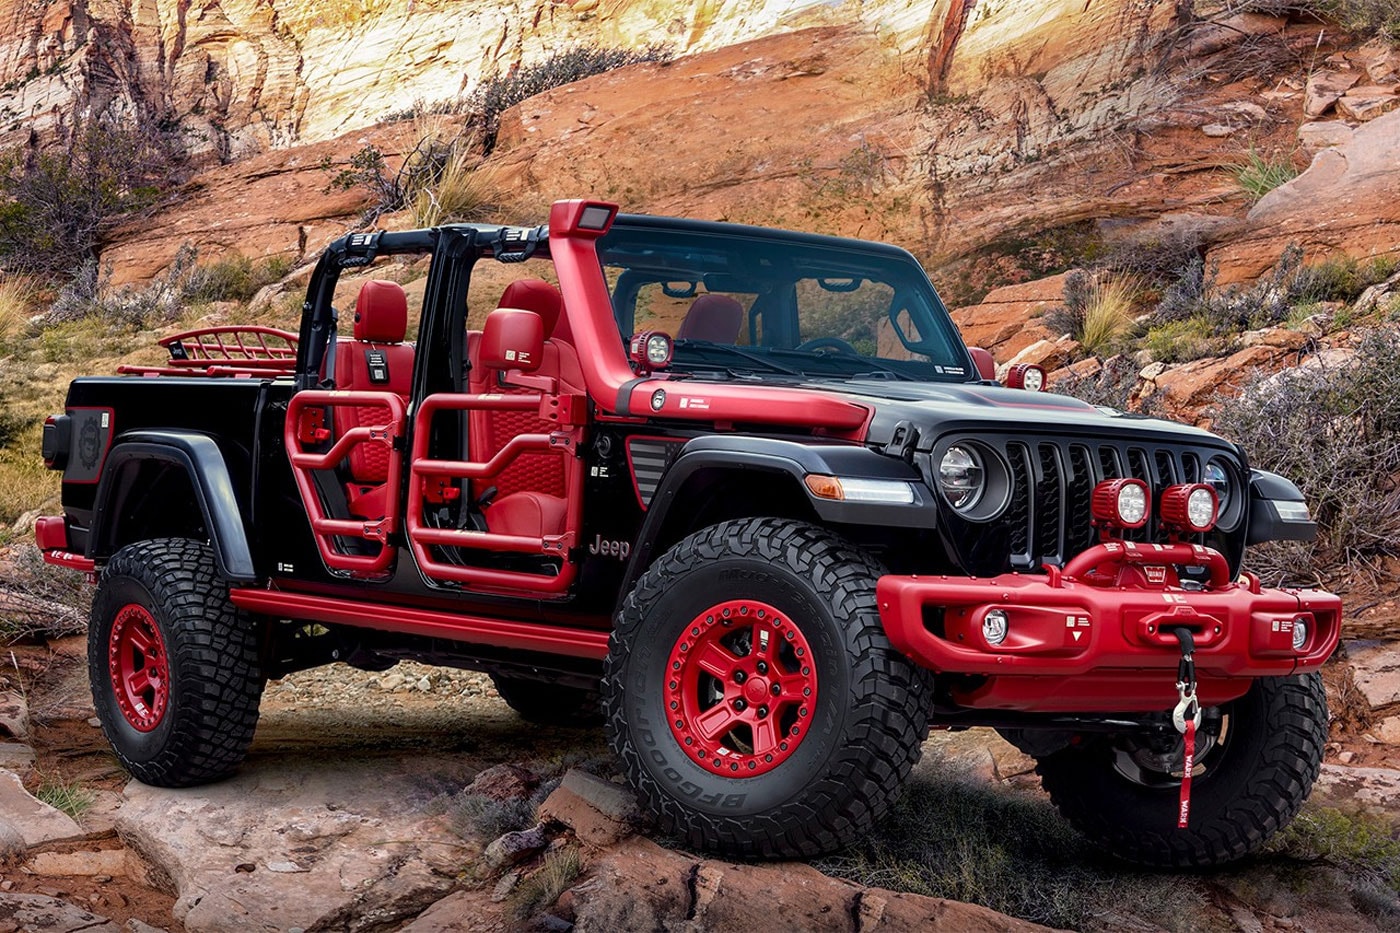 Jeep Unveils Seven New Electric Wrangler Magneto 2.0 Concepts electric vehicle suv tesla suv 600 horsepower 